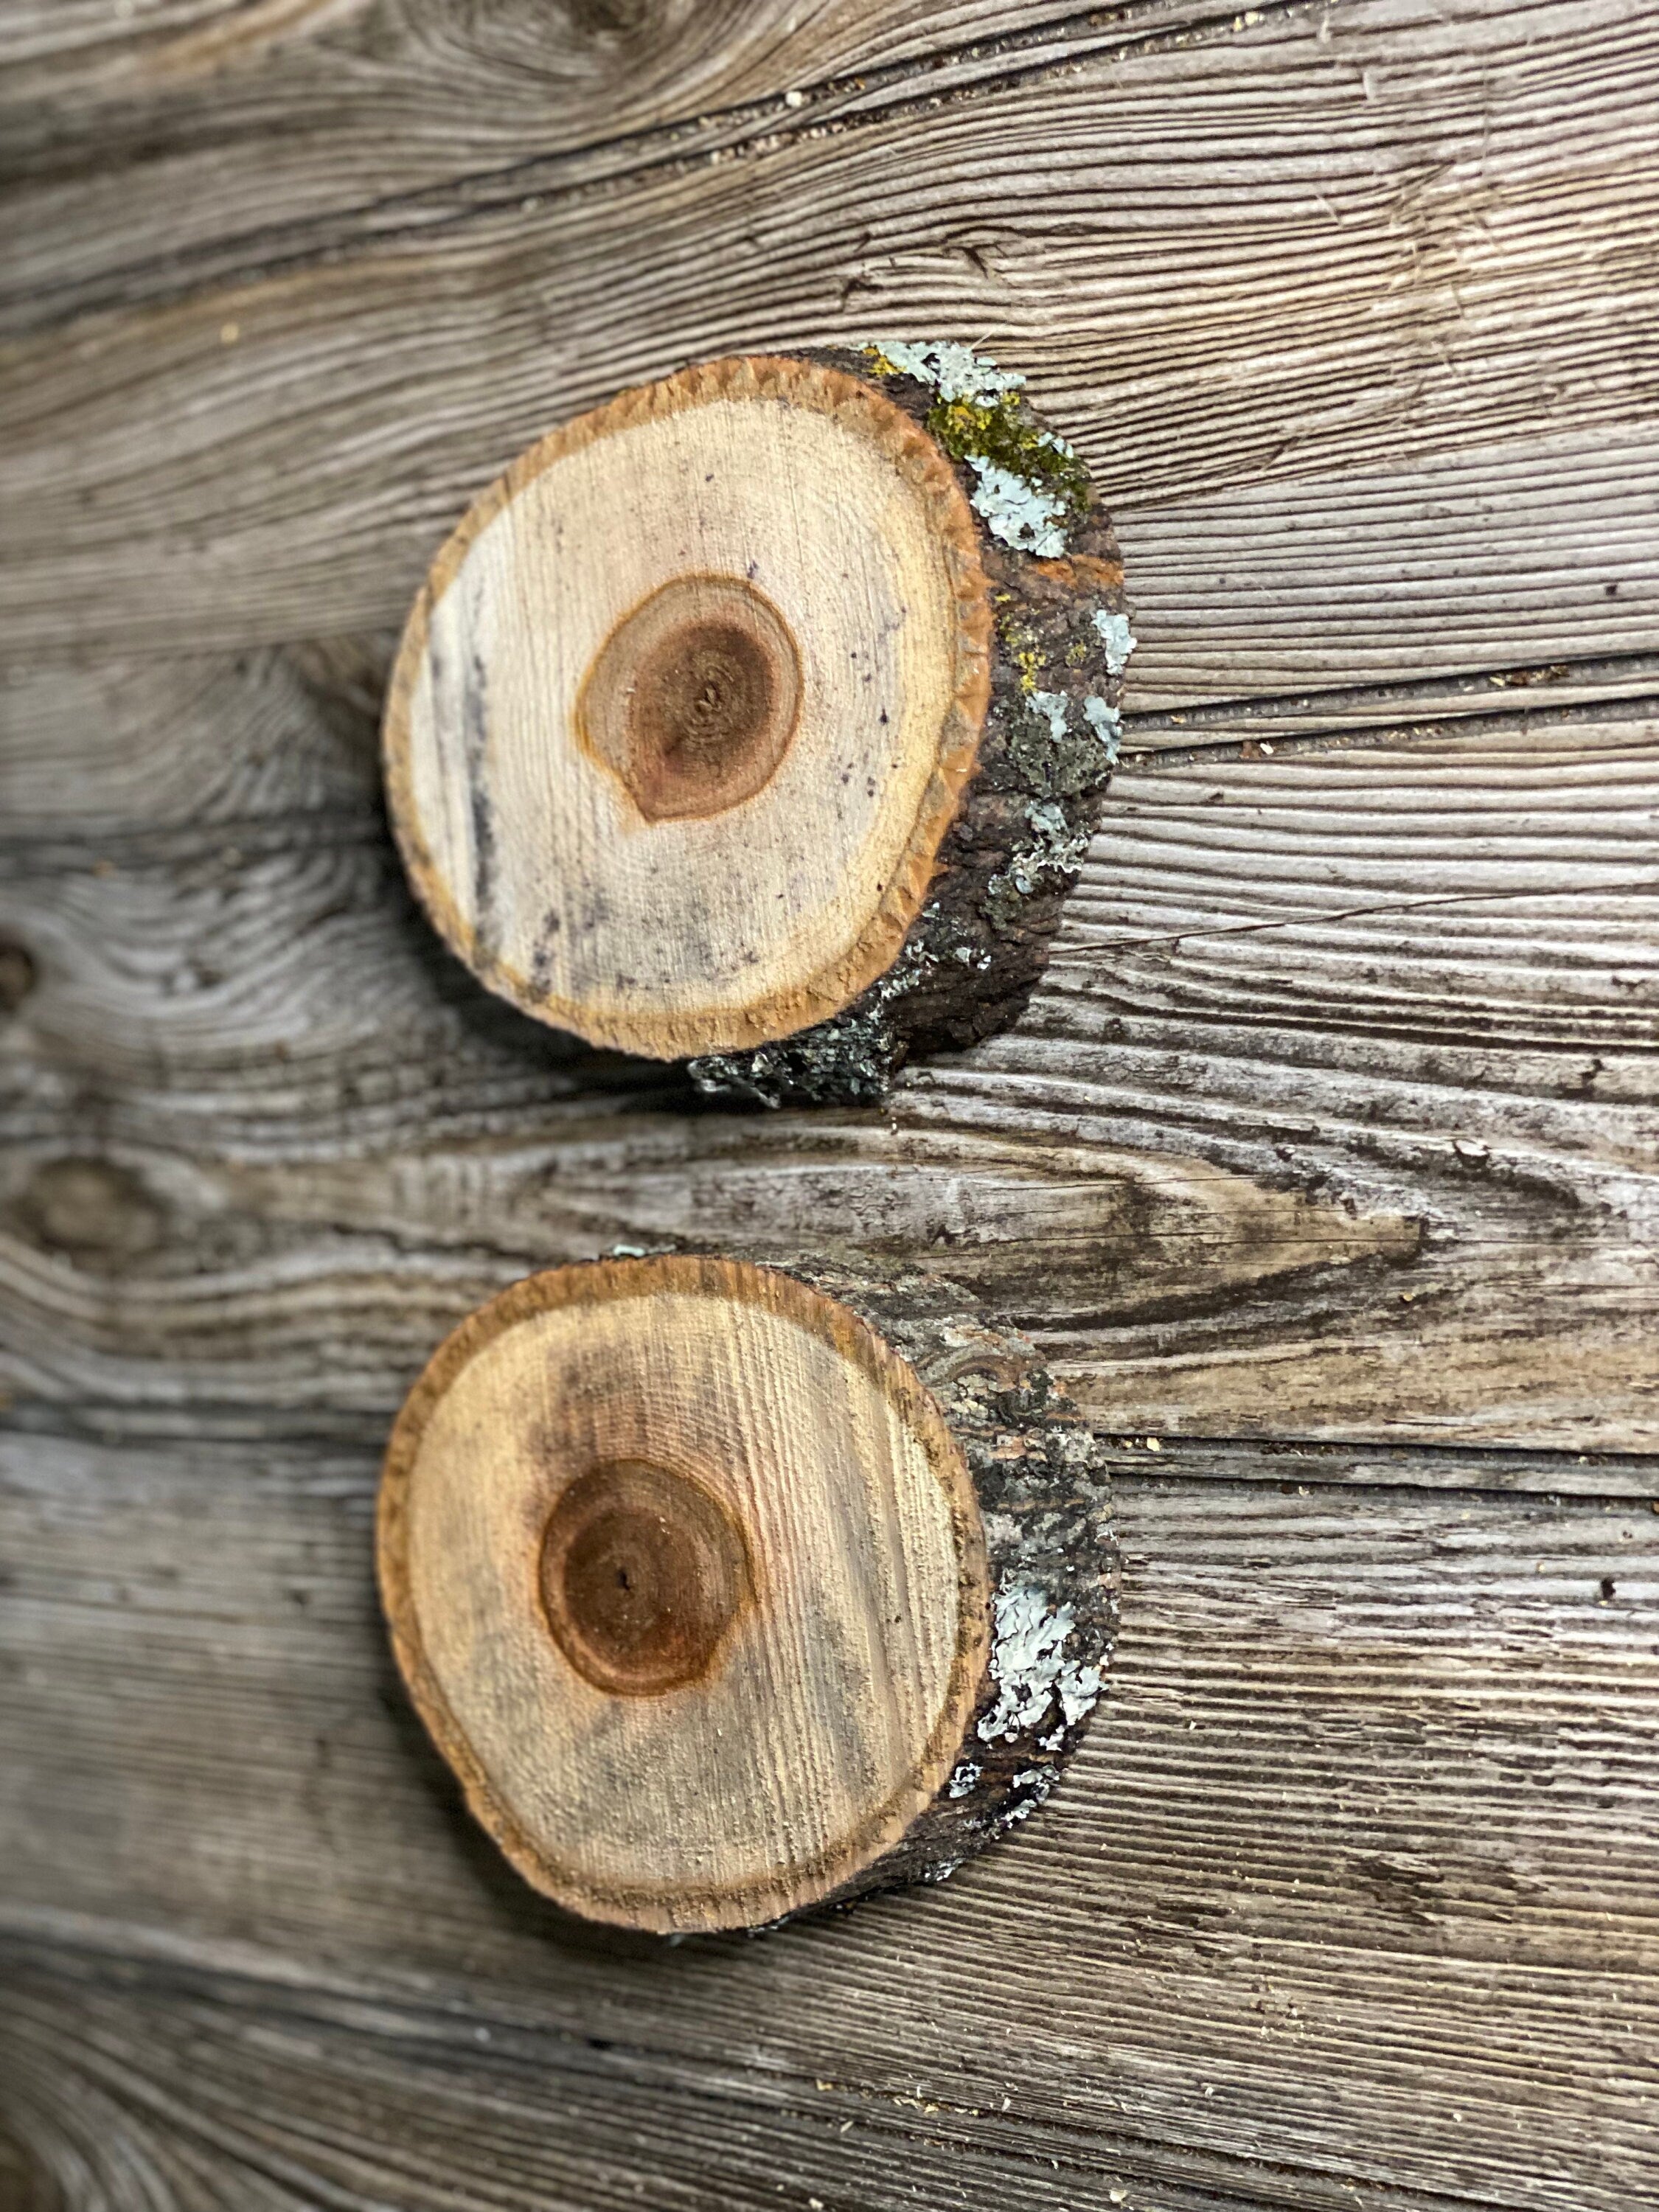 Two Hickory Burl Slices, Approximately 5 Inches Long by 4 Inches Wide and 3/4 Inch Thick